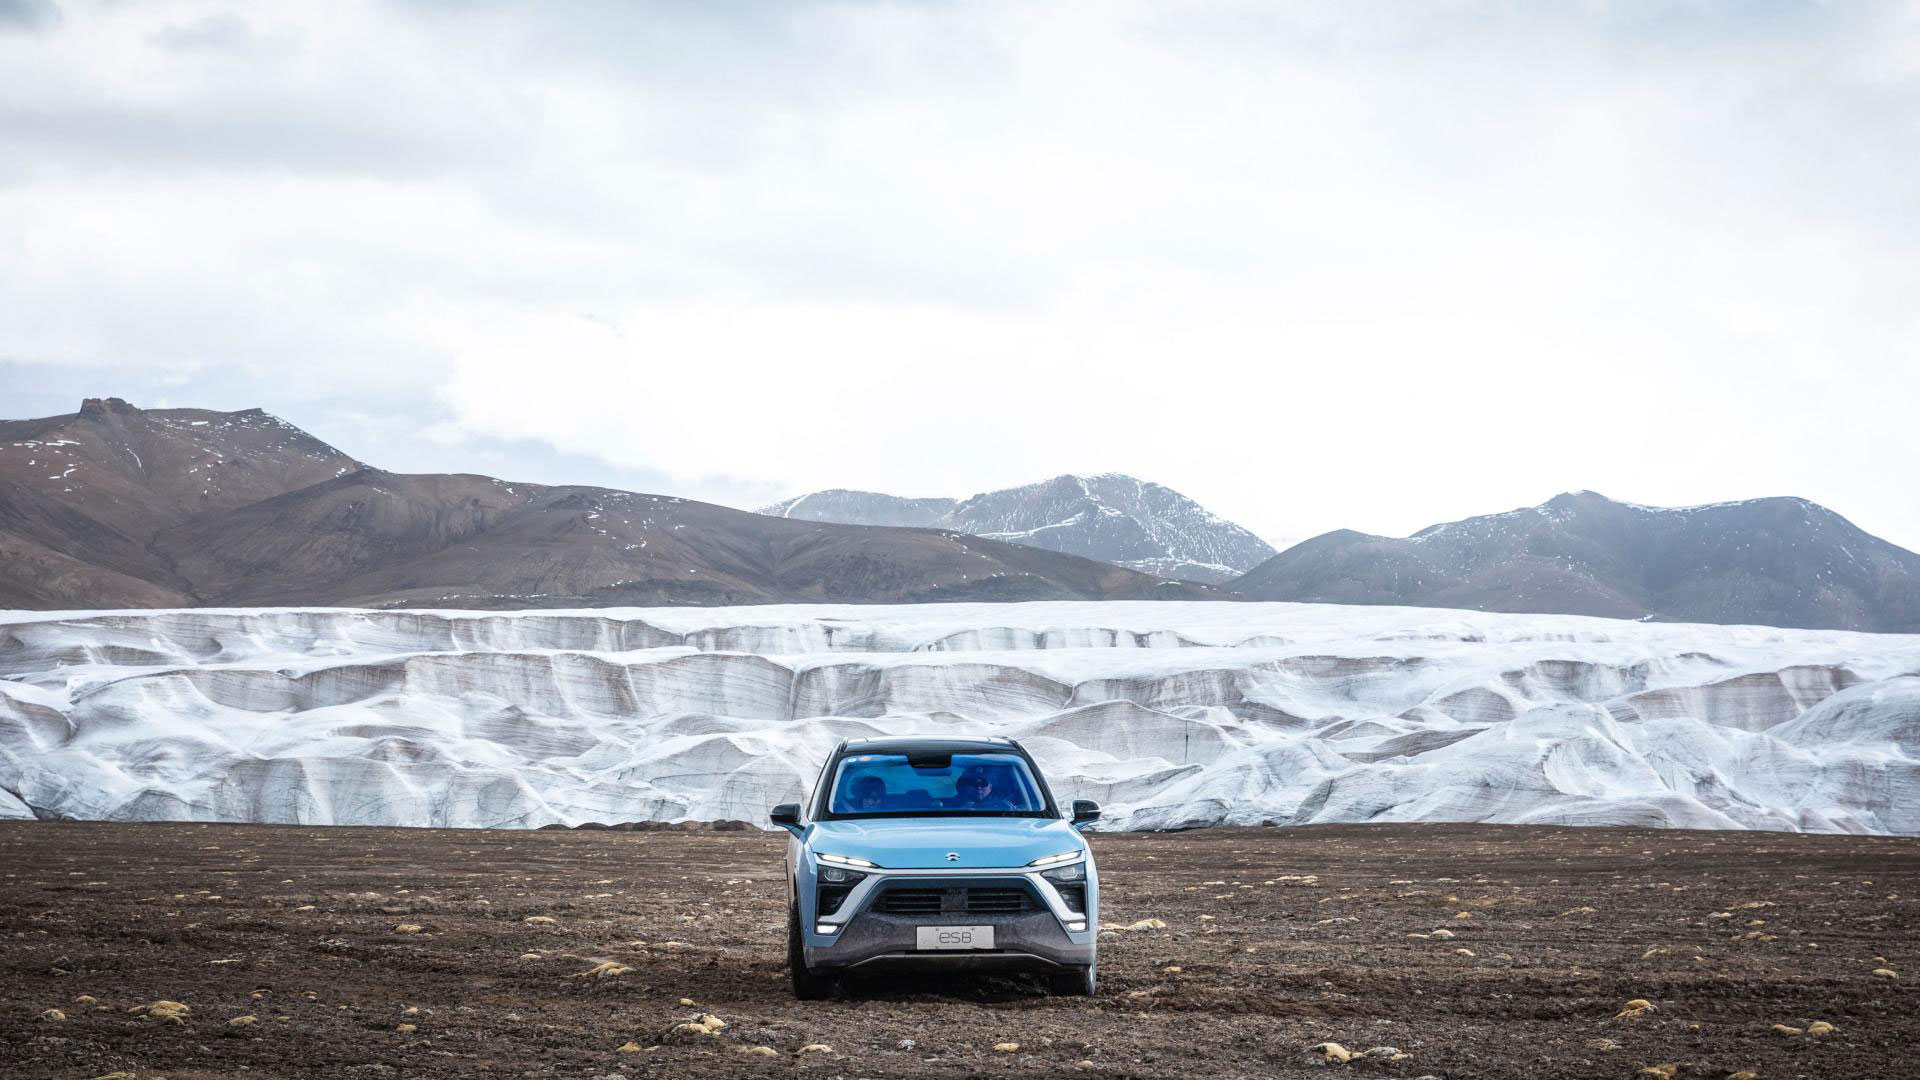 Highest altitude achieved in an electric car